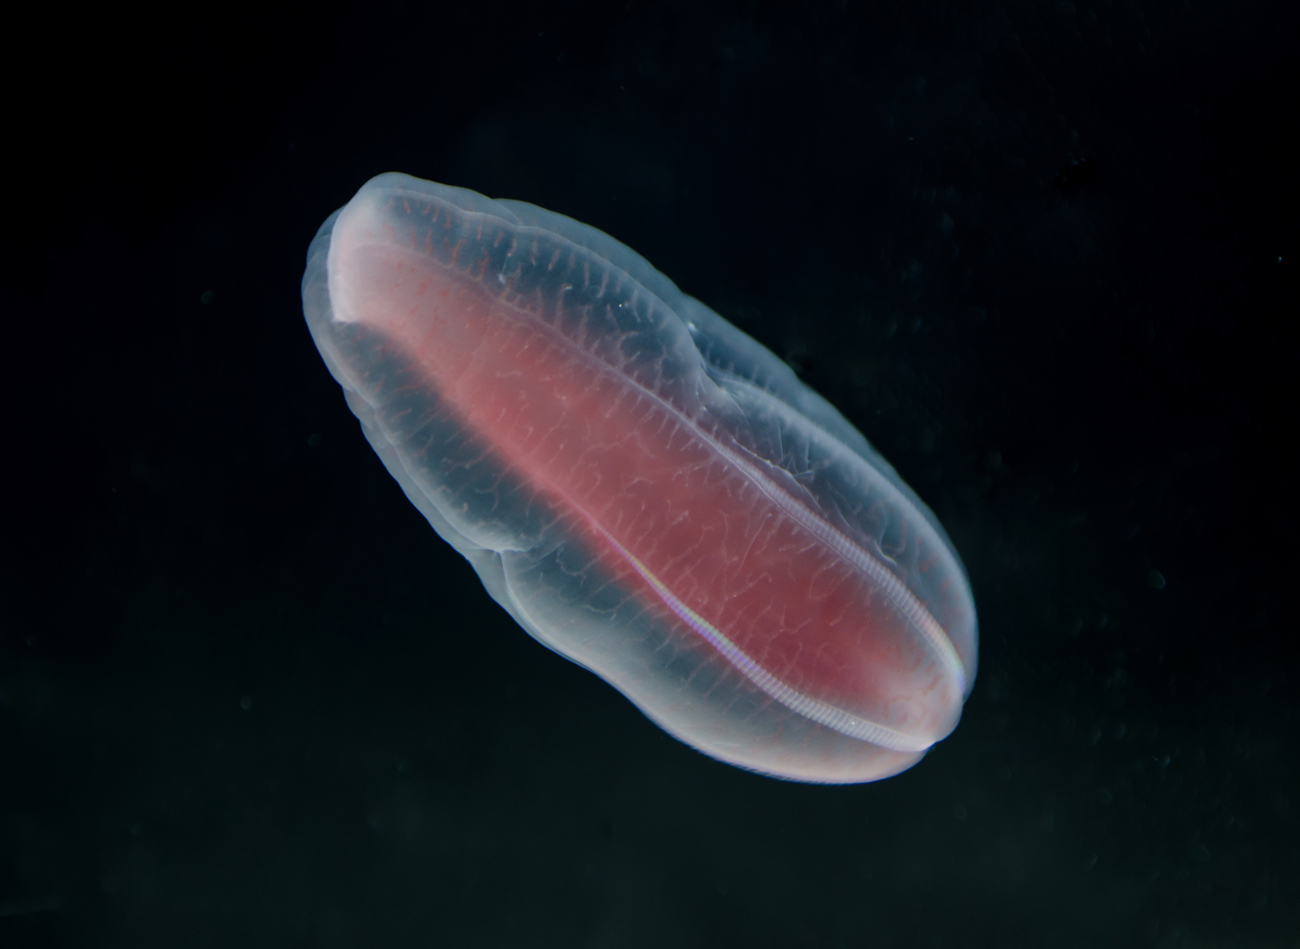 A comb jelly or ctenophore - Beroe abyssicola